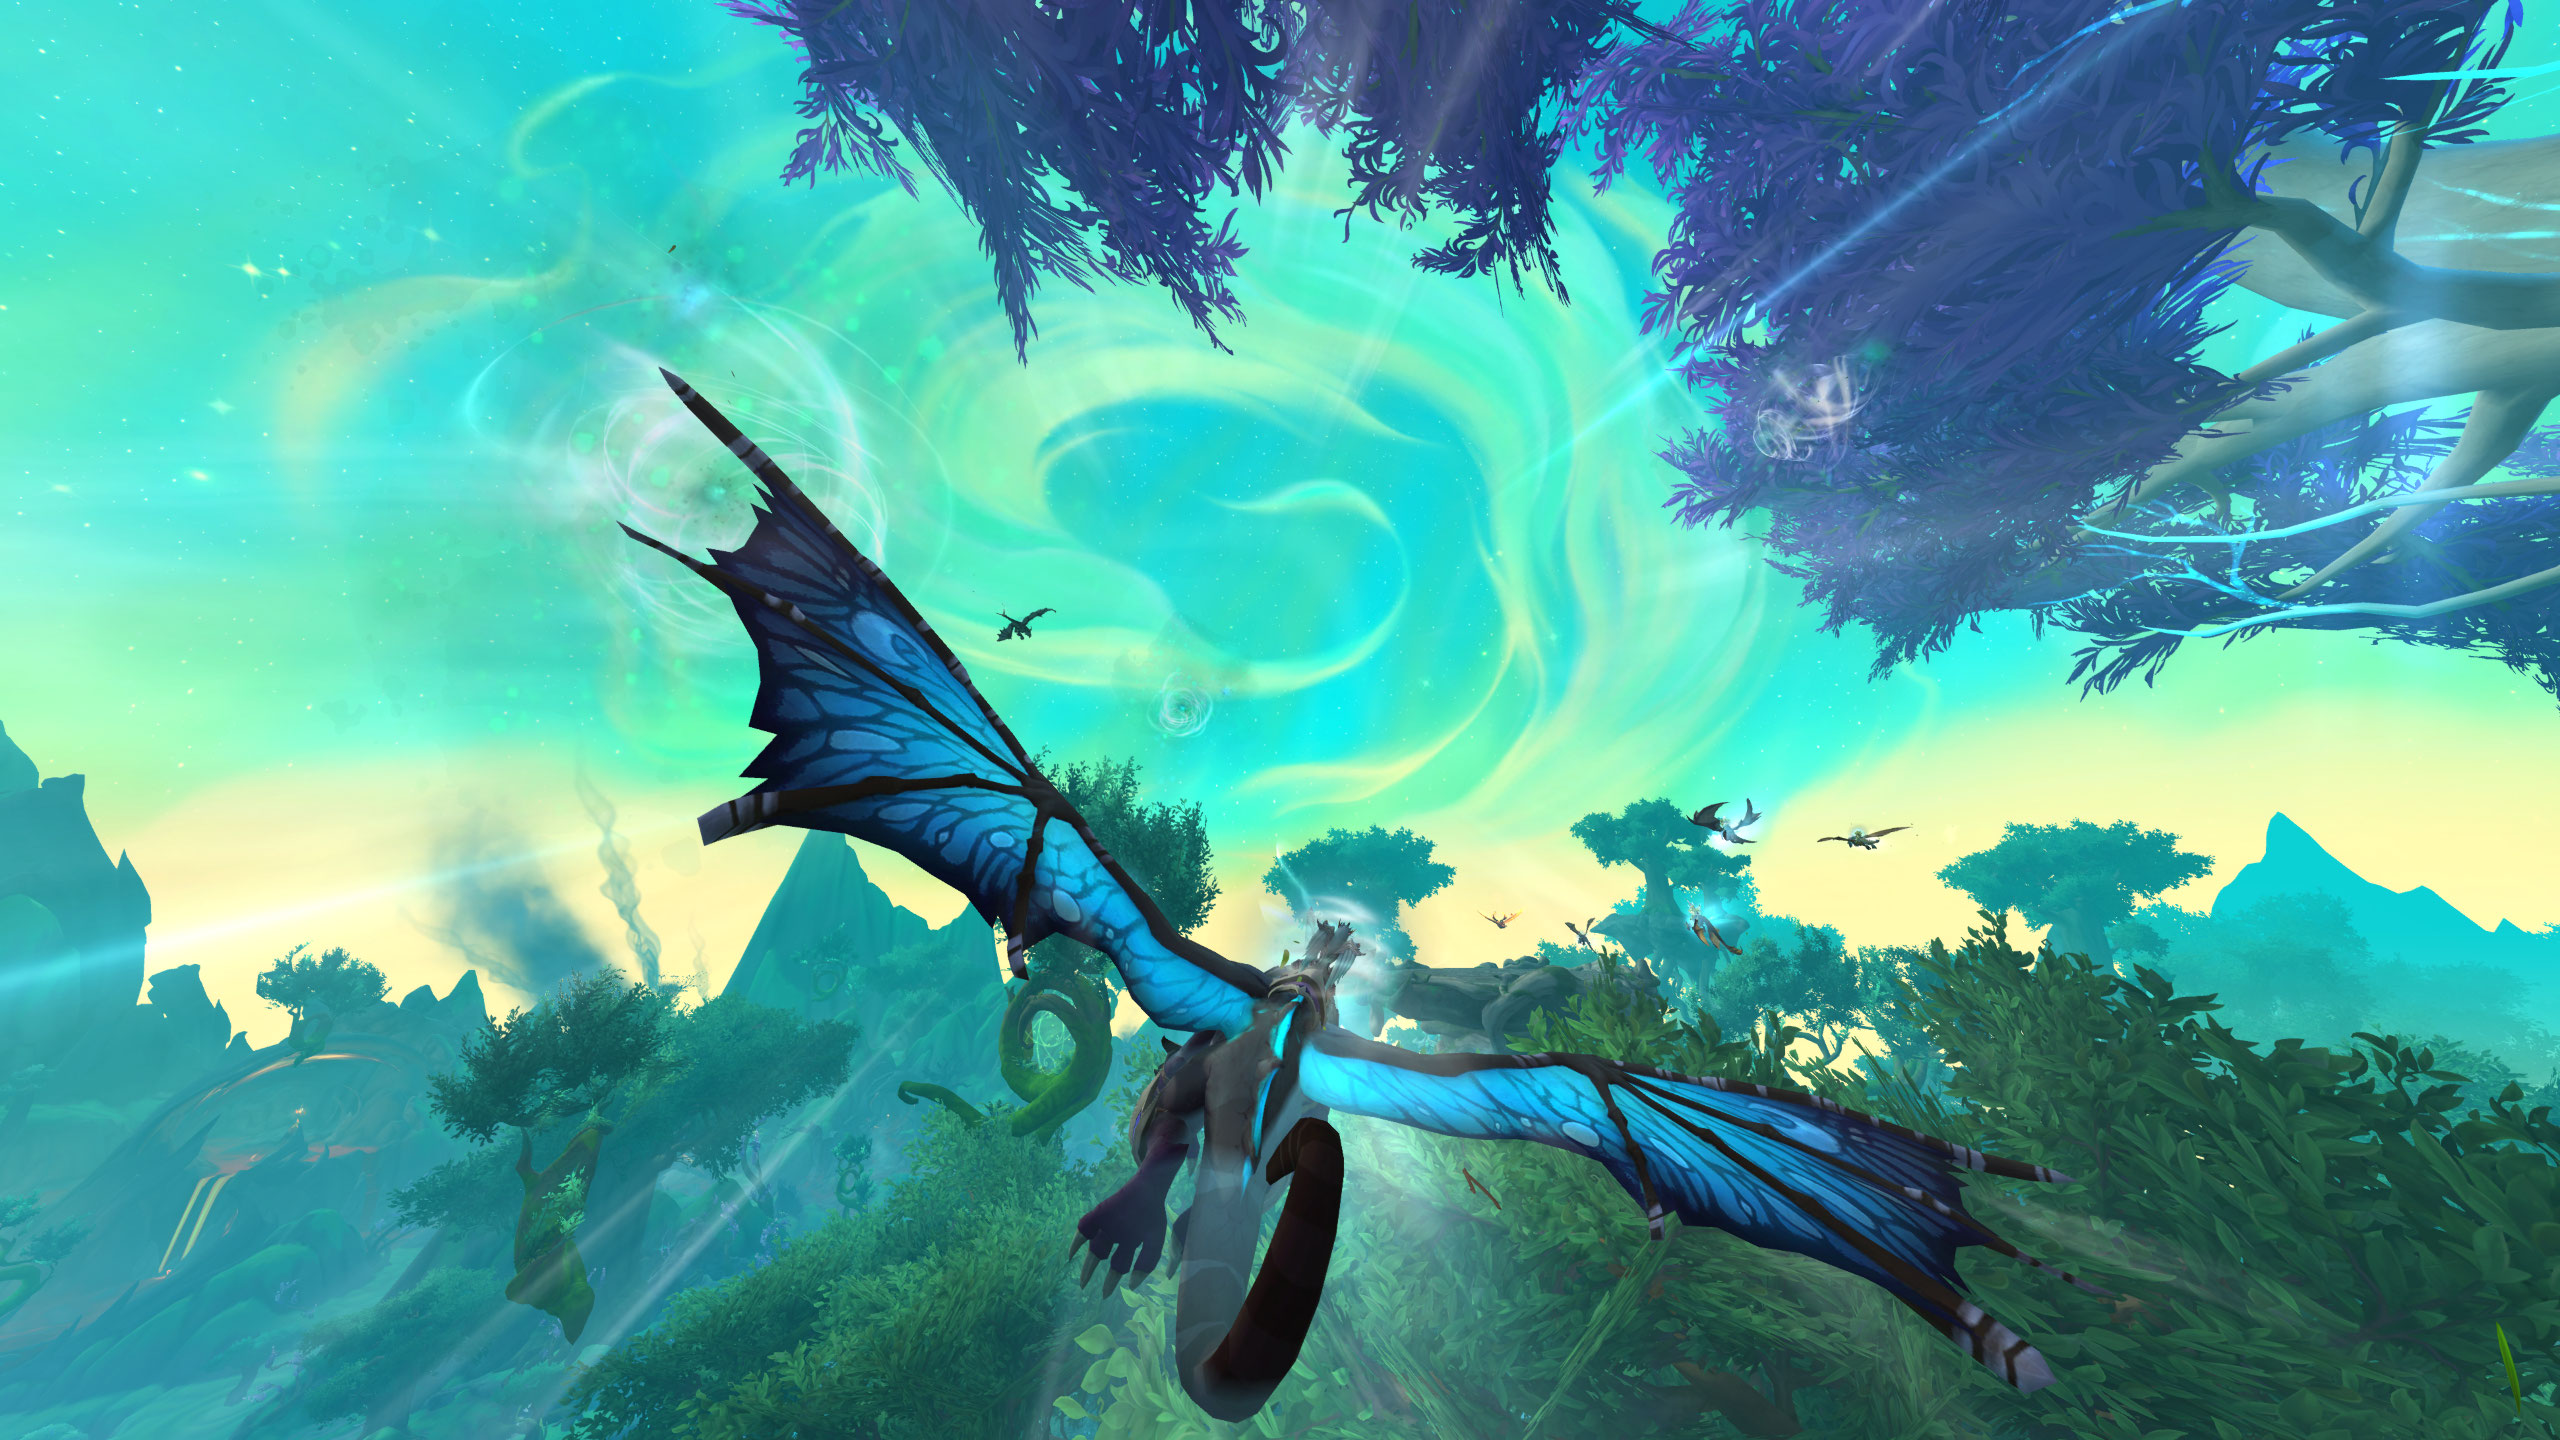 Amirdrassil, the Dream's Hope, Tindral Sageswift fight with flying between platforms